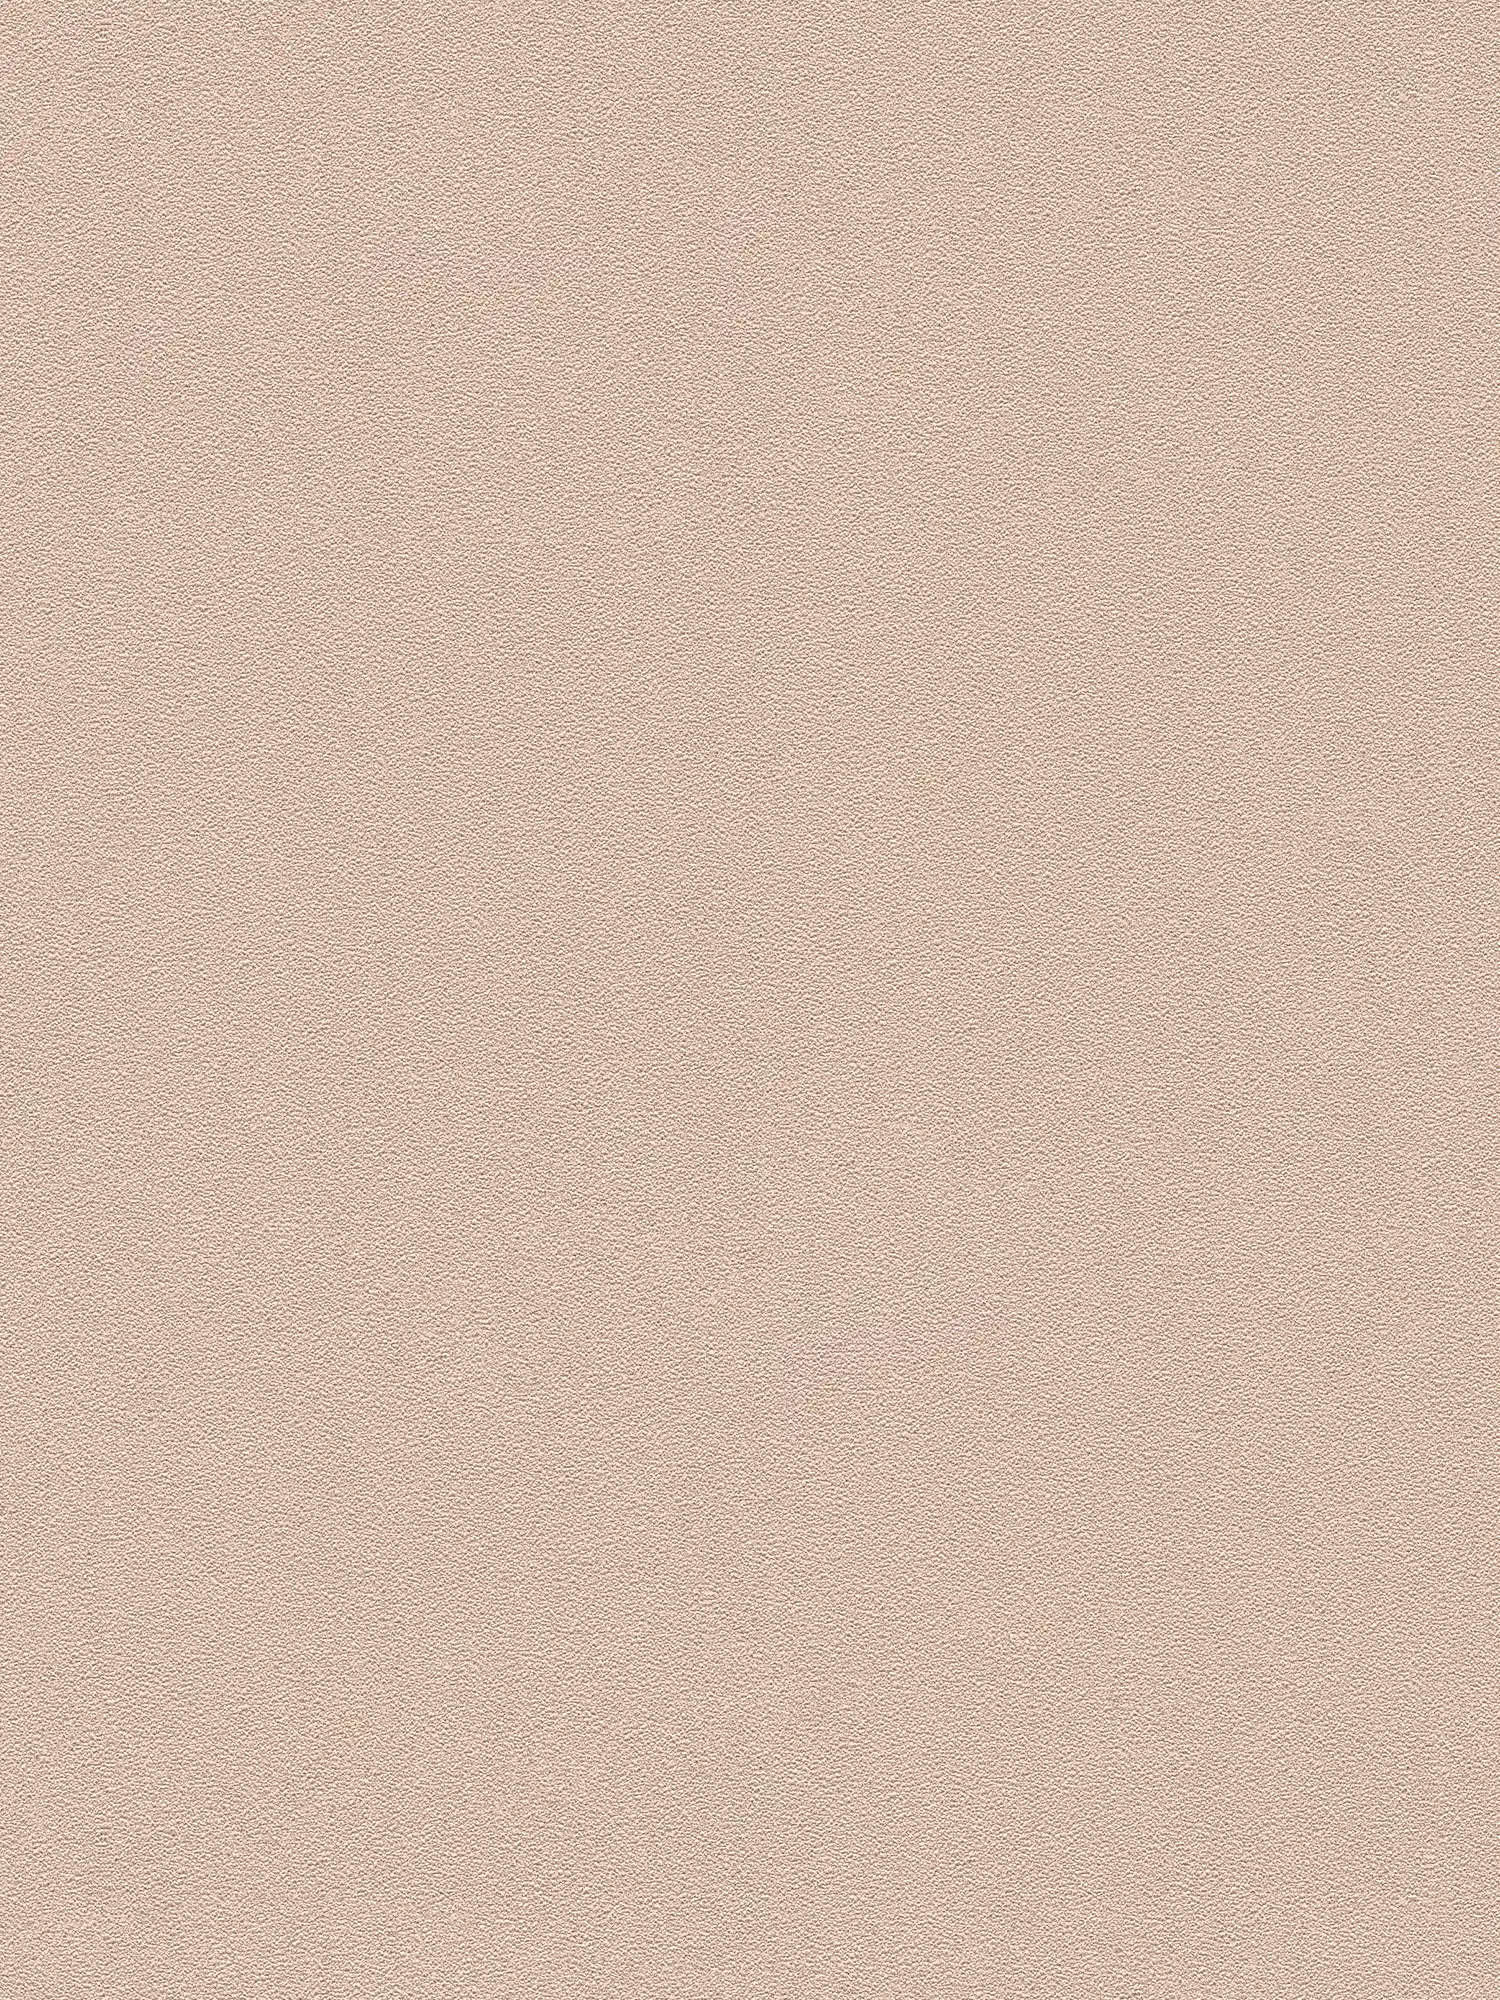 Plain wallpaper natural colour and texture pattern - brown
